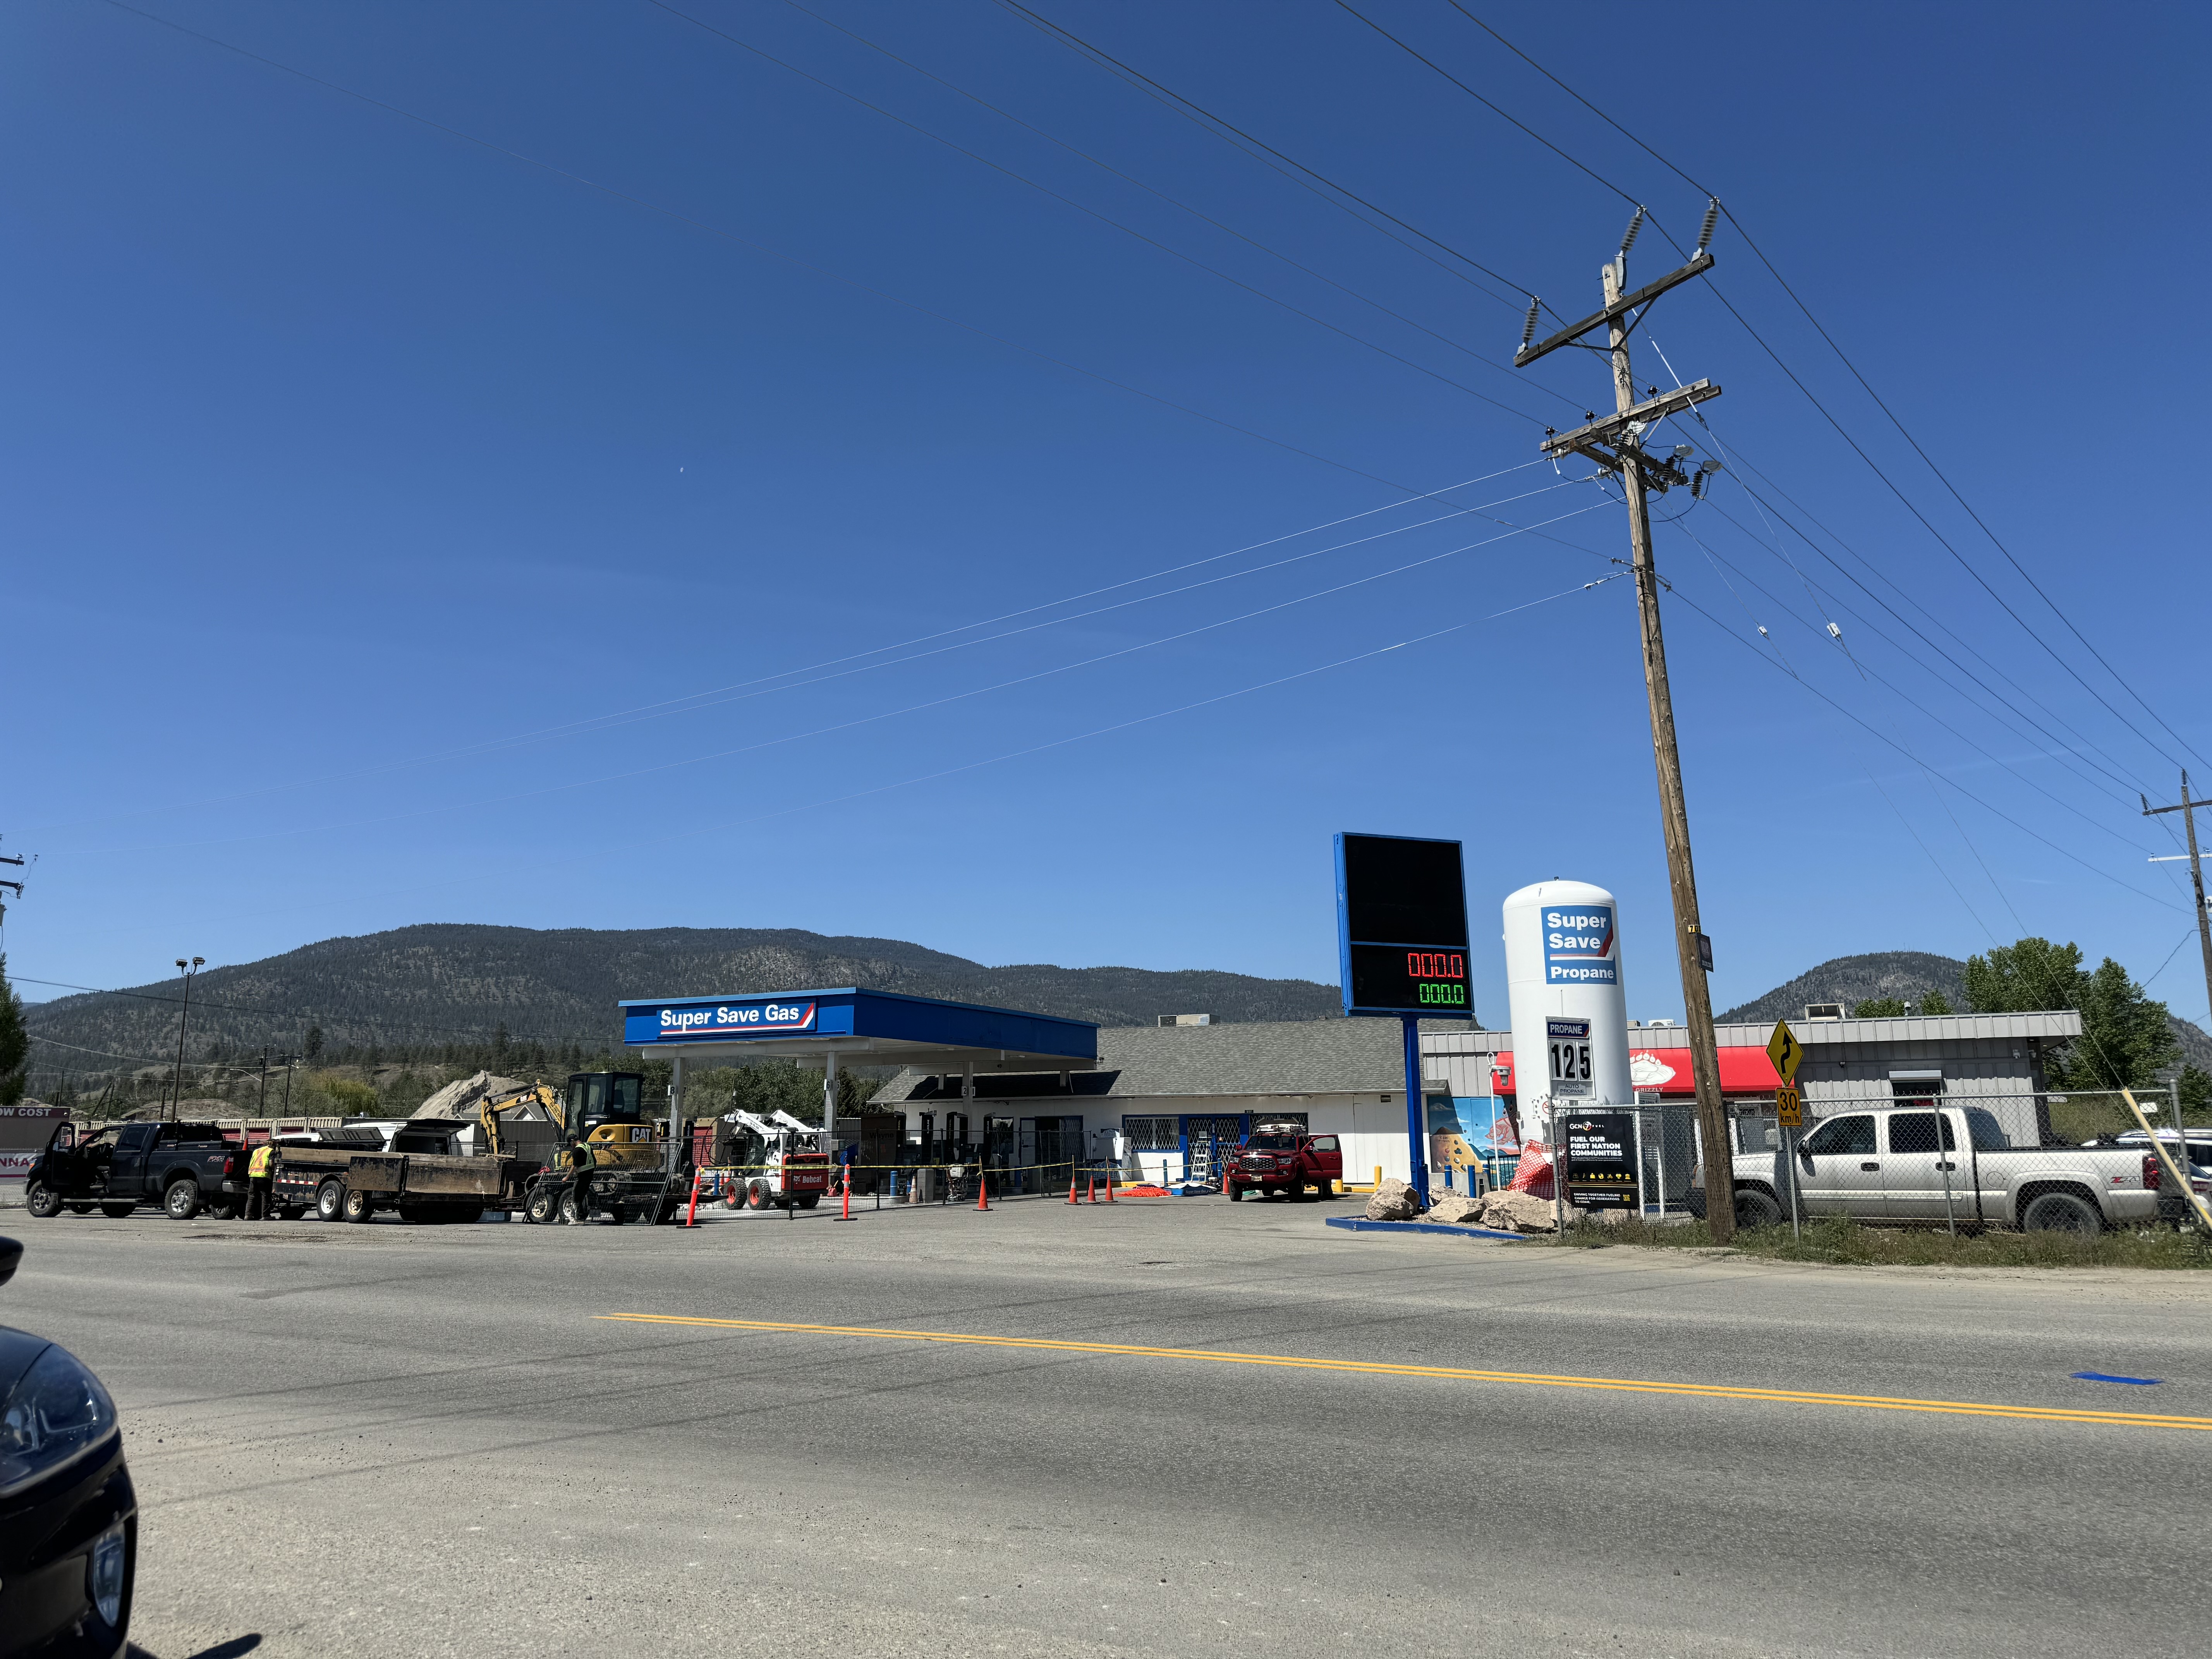 Penticton gas station to rebrand following legal dispute